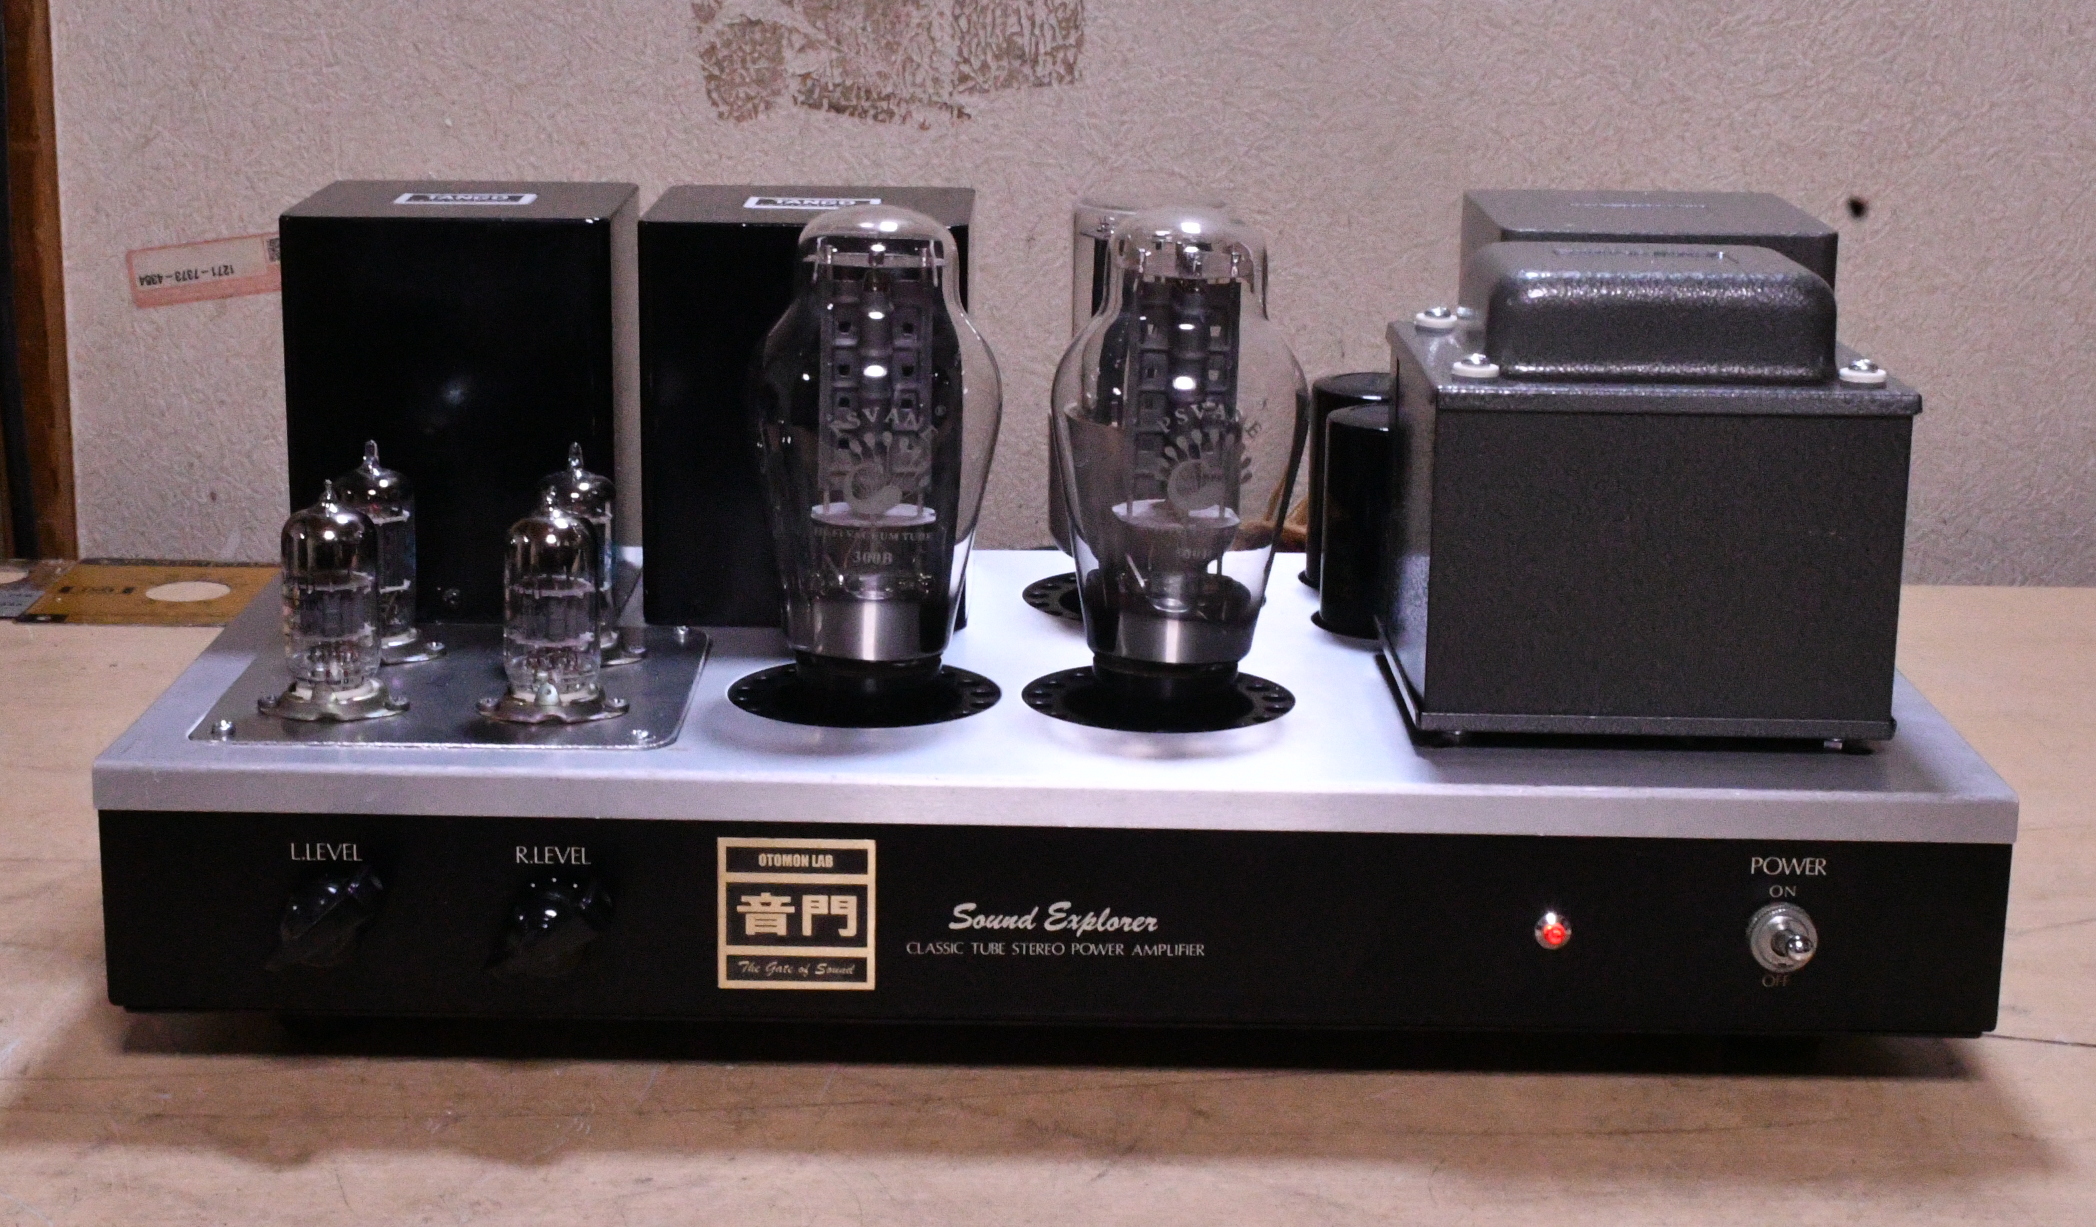 300B SE tube amplifier ,output 9W 12AY7/5687 with Sound Exprorer chassis